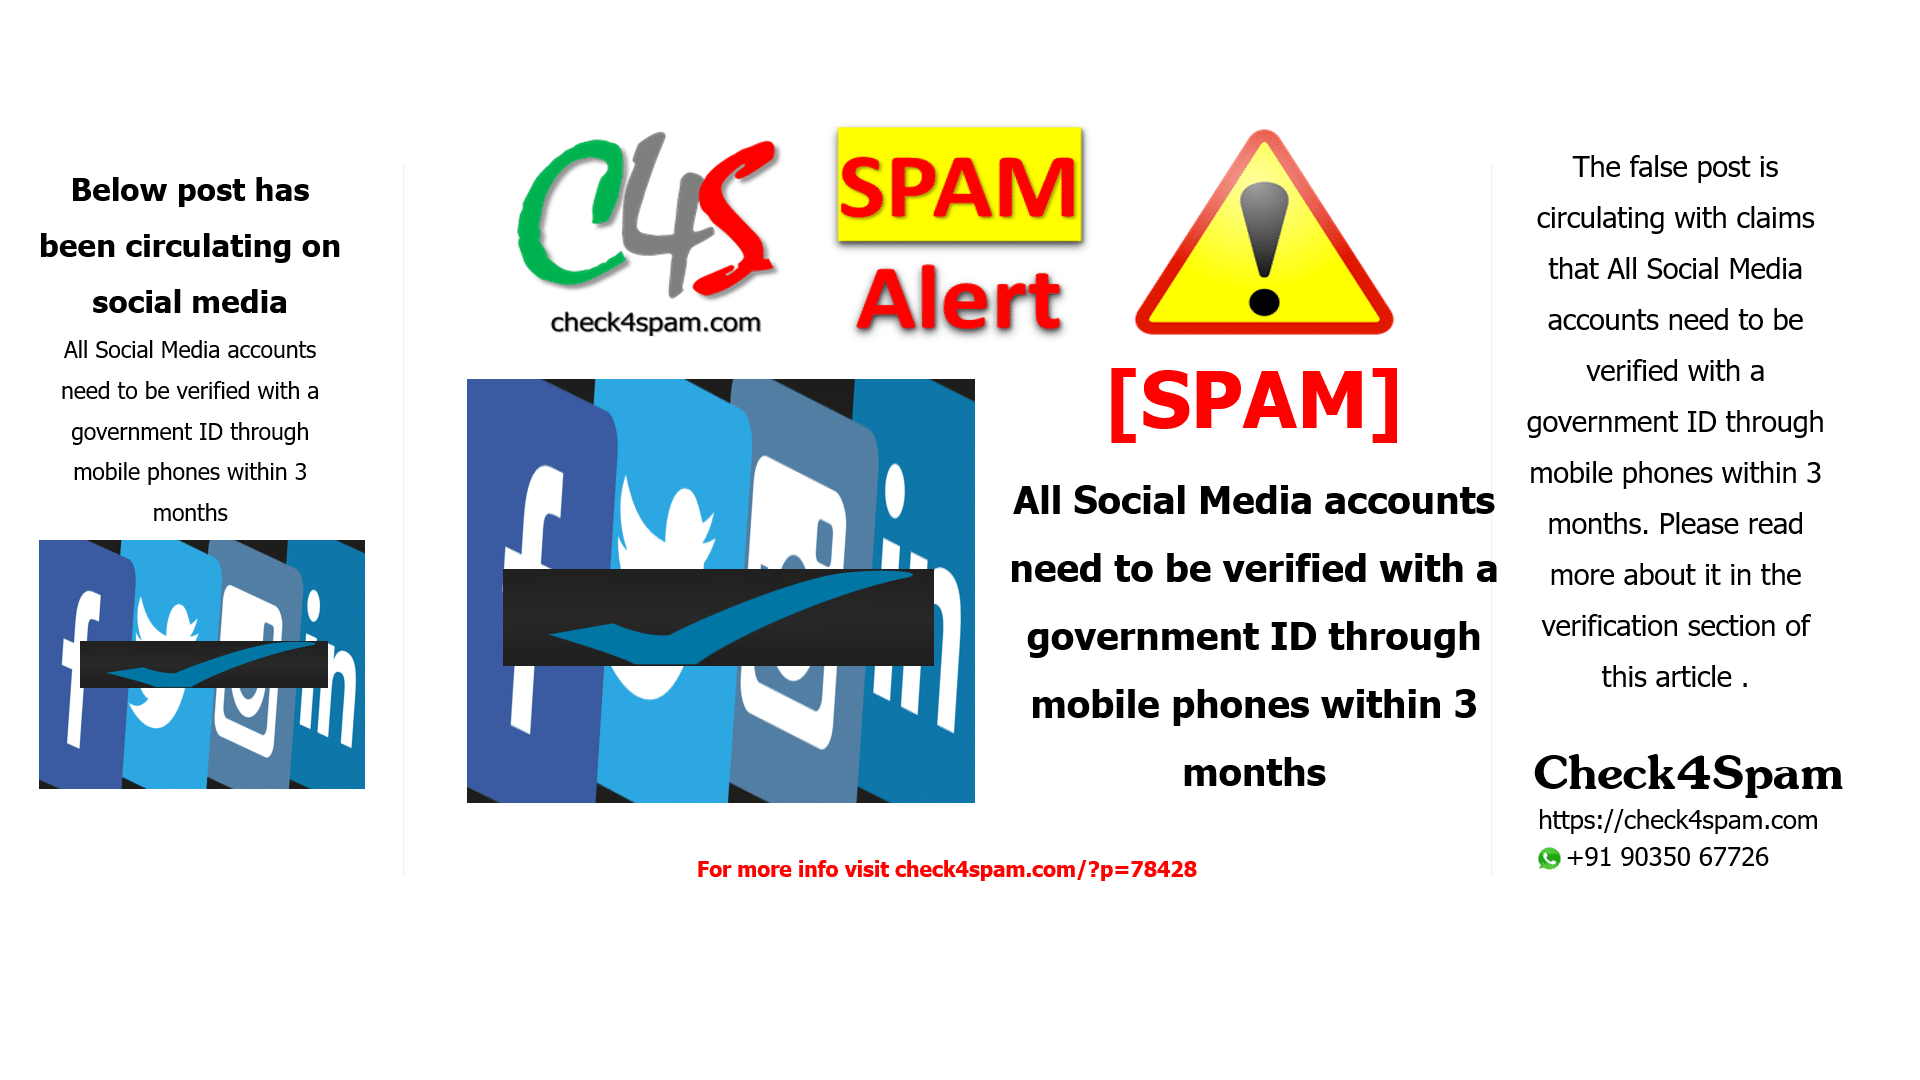 All Social Media Accounts Need To Be Verified With A Government ID Through Mobile Phones Within 3 Months